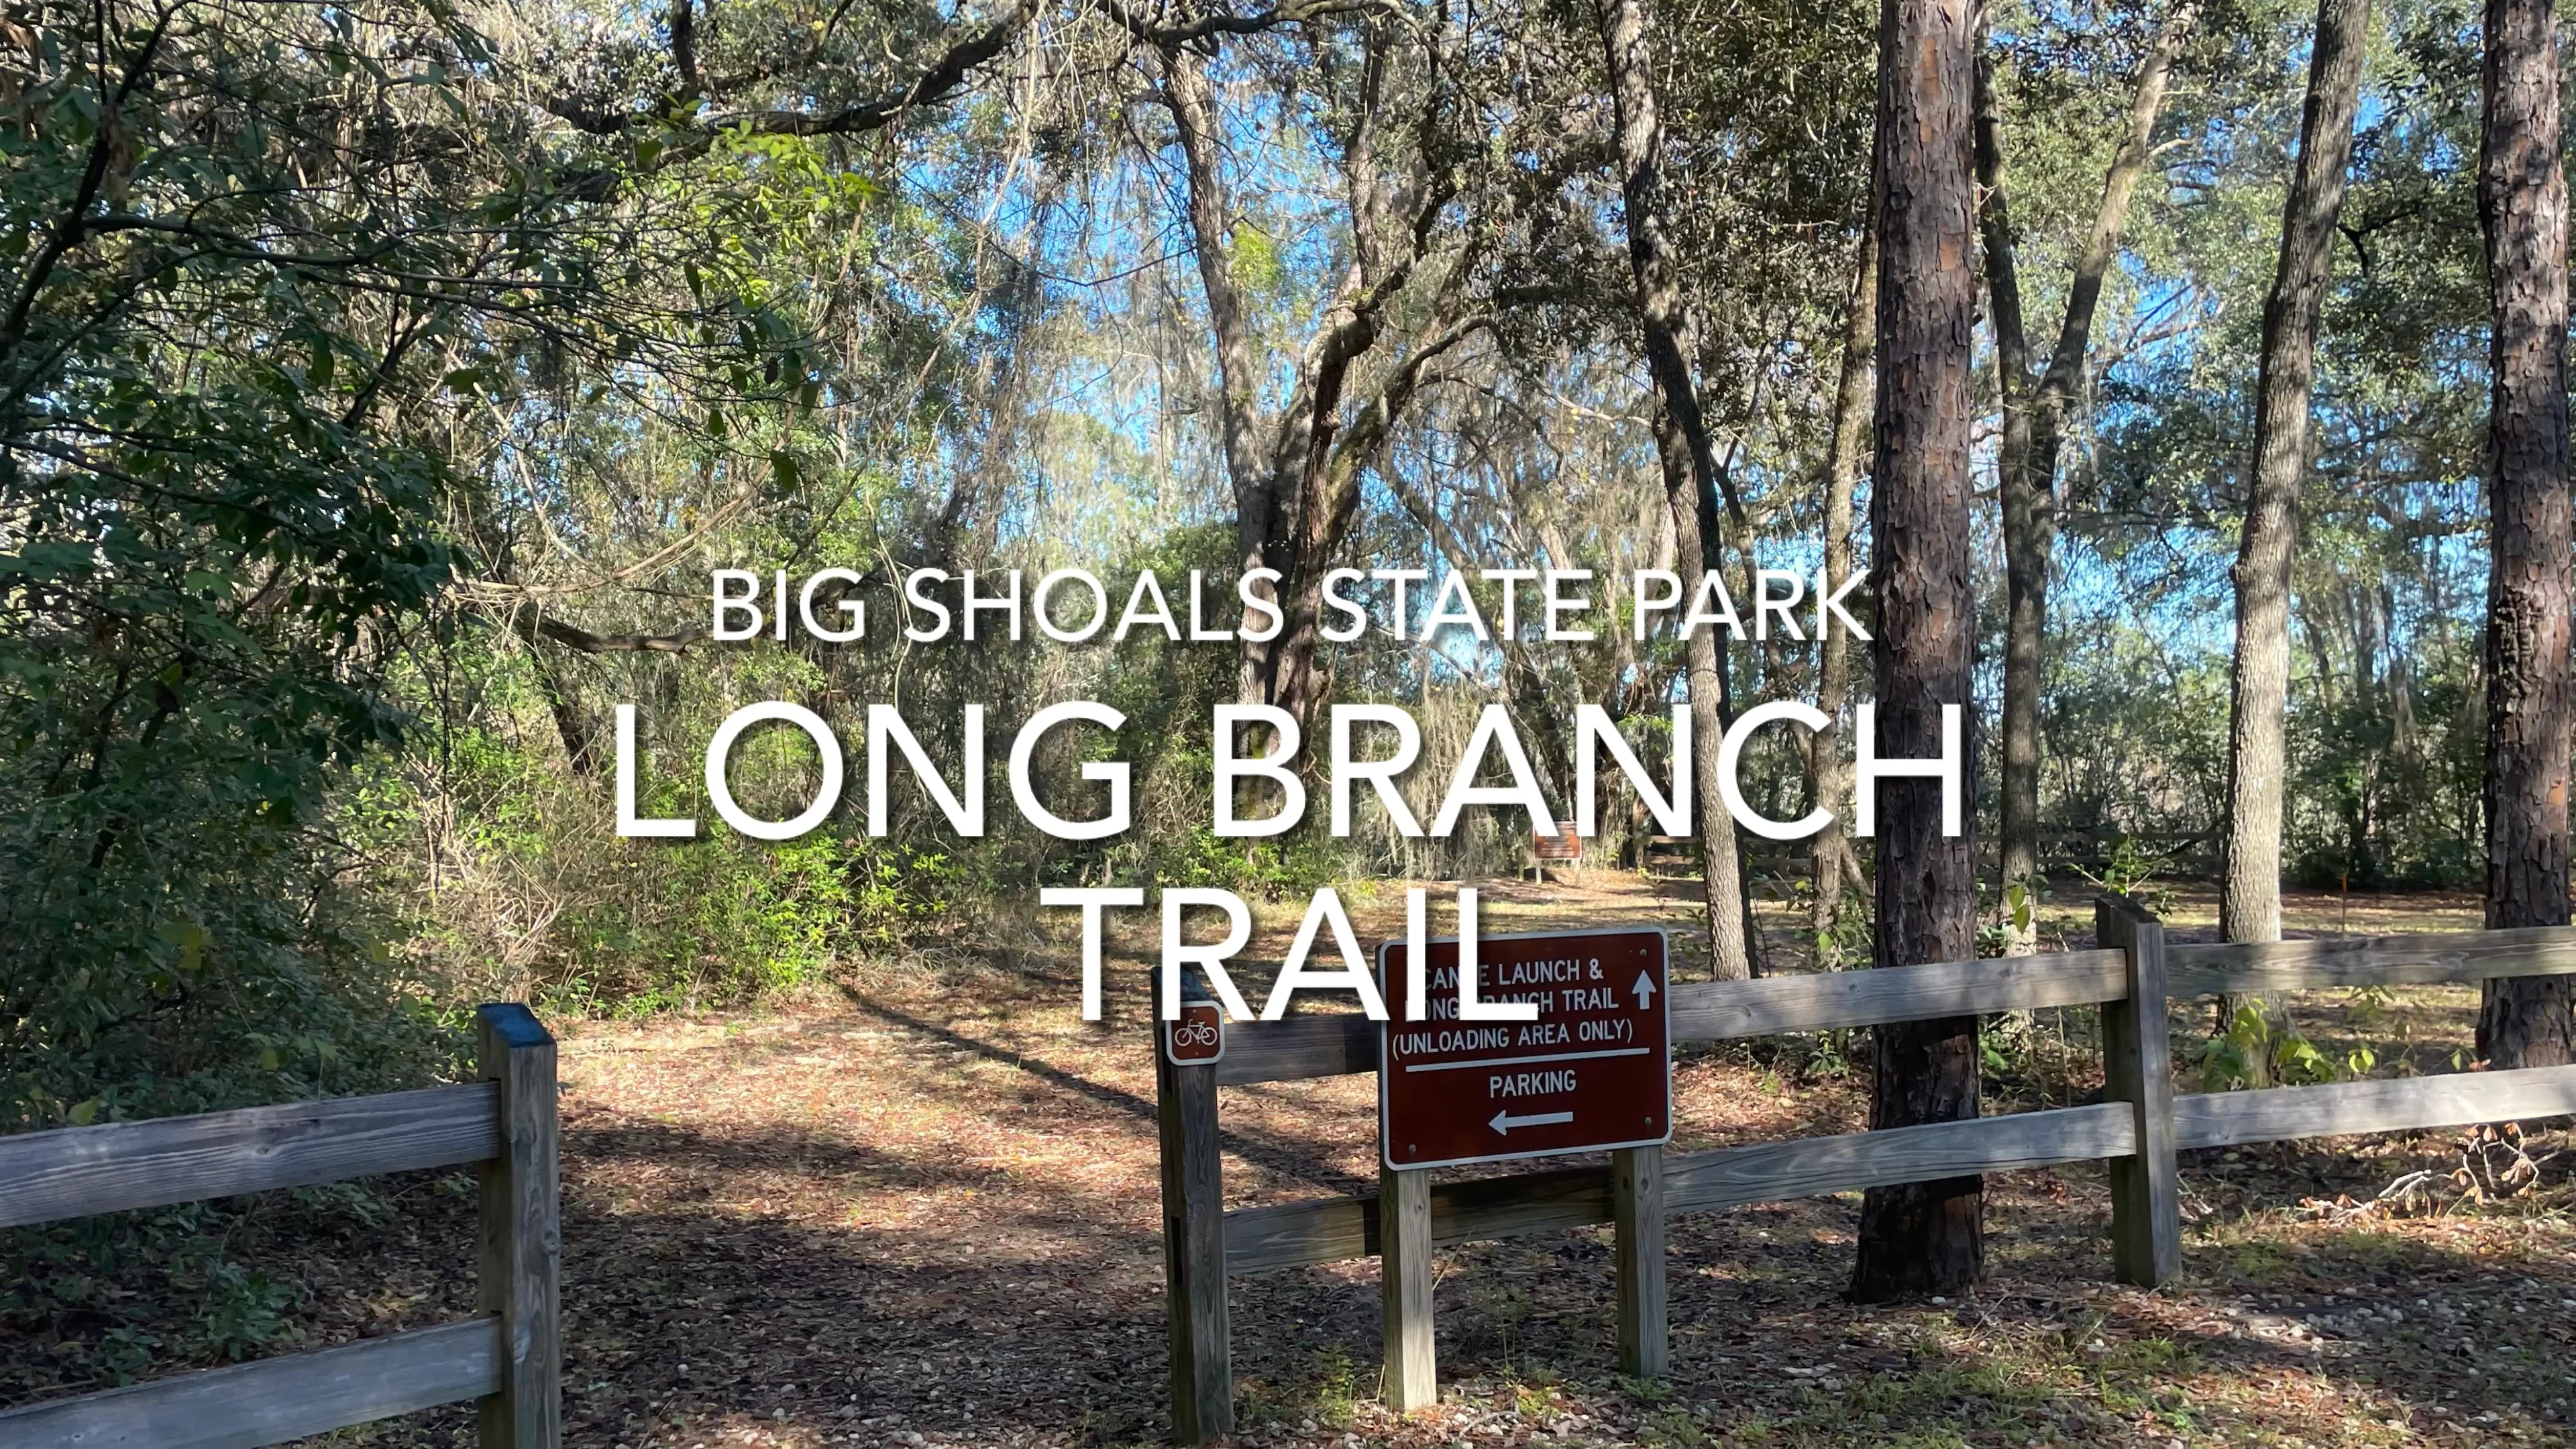 Big Shoals State Park Long Branch Trail on Vimeo